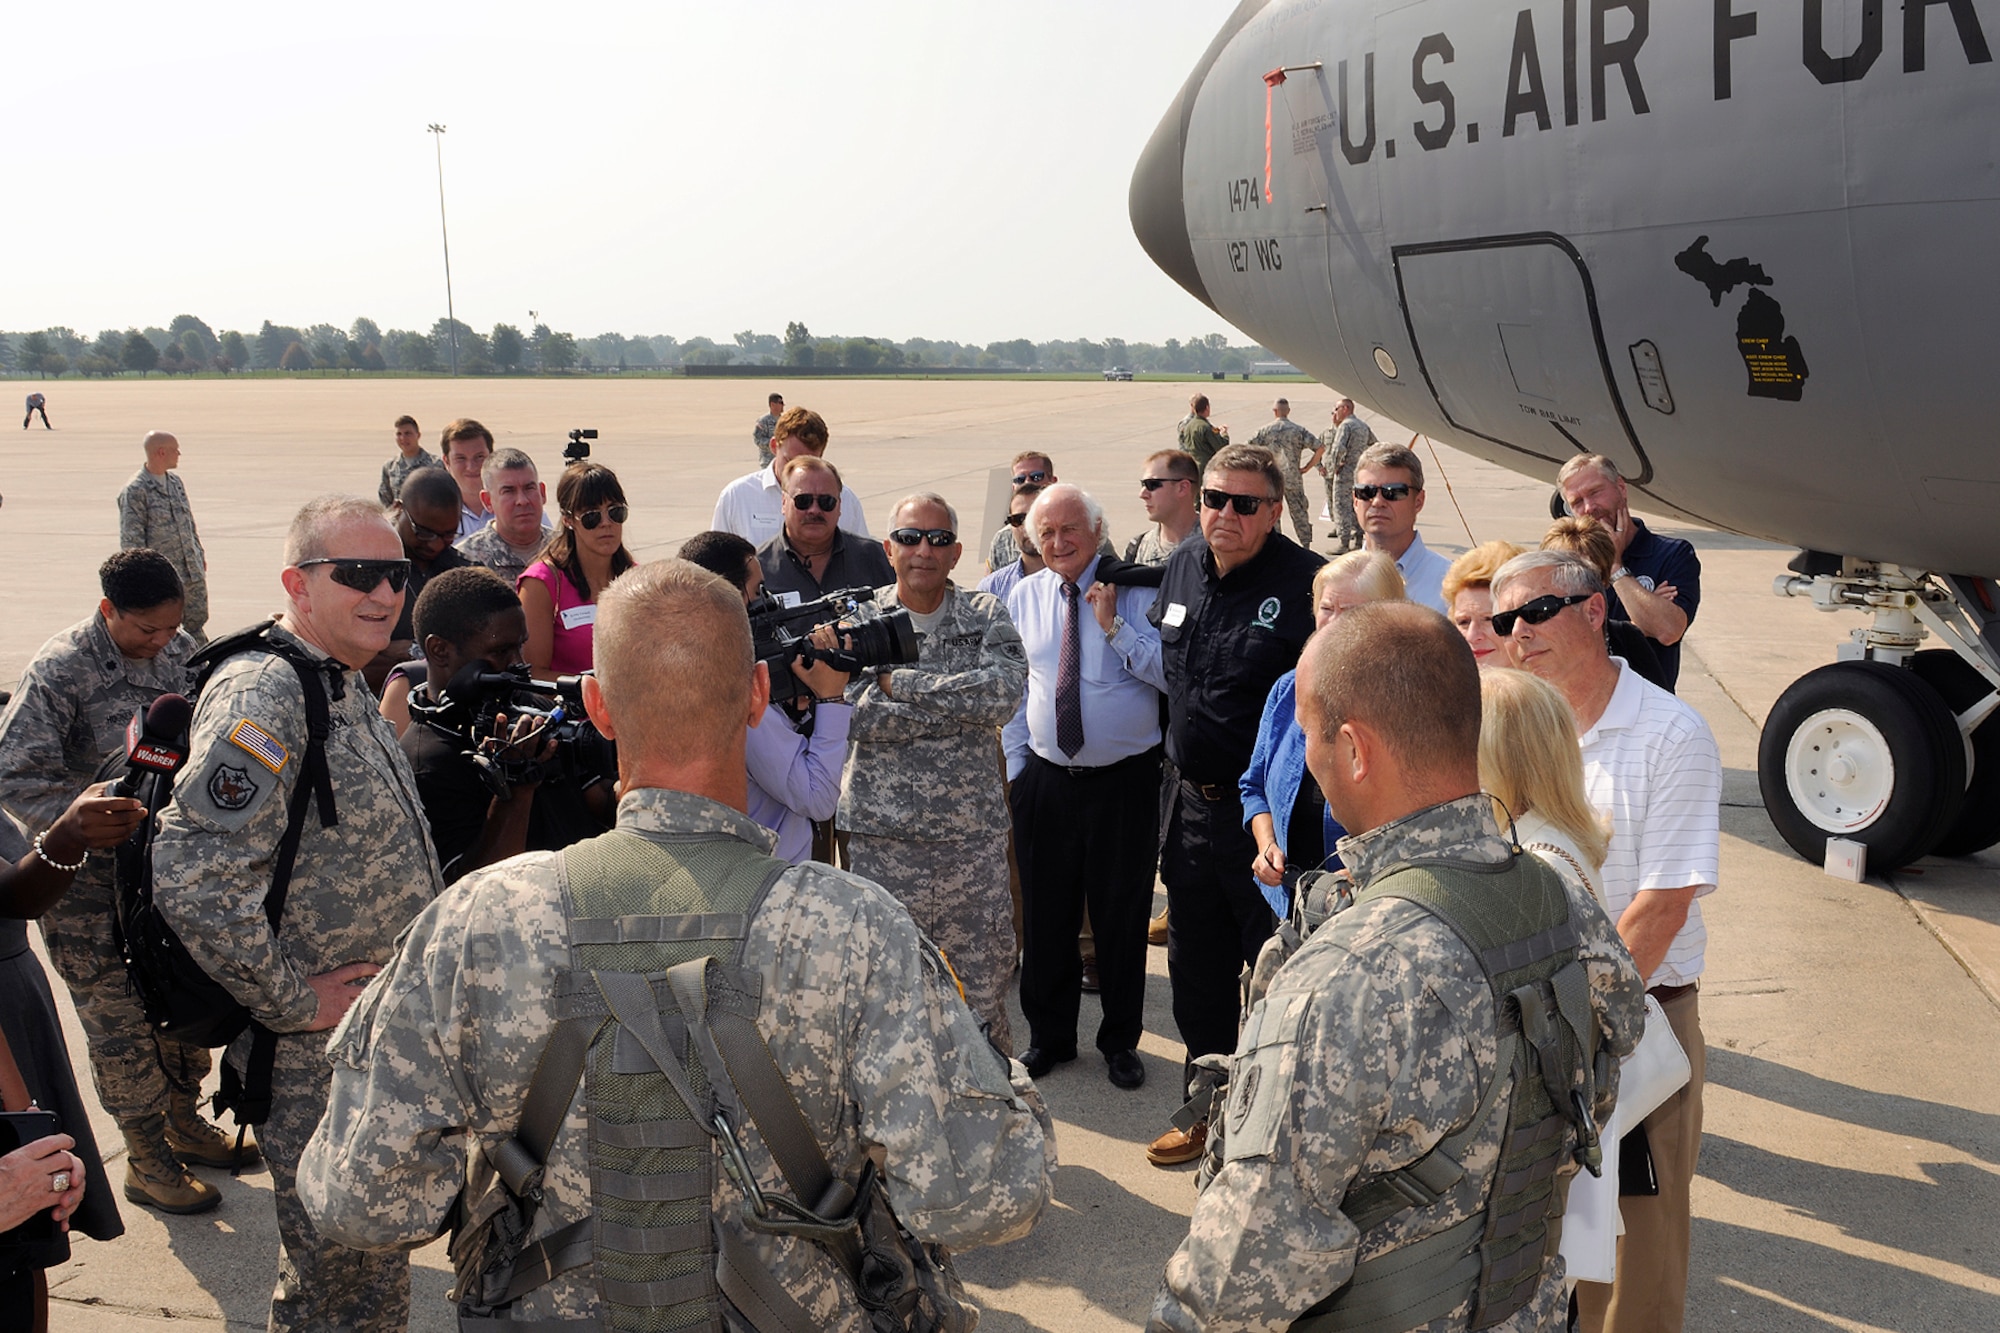 150902-Z-EZ686-057 – Members of Congress and their staff converse with Soldiers and Airmen of the Michigan National Guard during a tour of Selfridge Air National Guard Base, Sep. 2, 2015.  In an historic visit, seven members of Congress toured Selfridge ANGB to gain insight into the diverse missions, capabilities and the future potential of the base.  (Air National Guard Photo by Master Sgt. David Kujawa/Released)